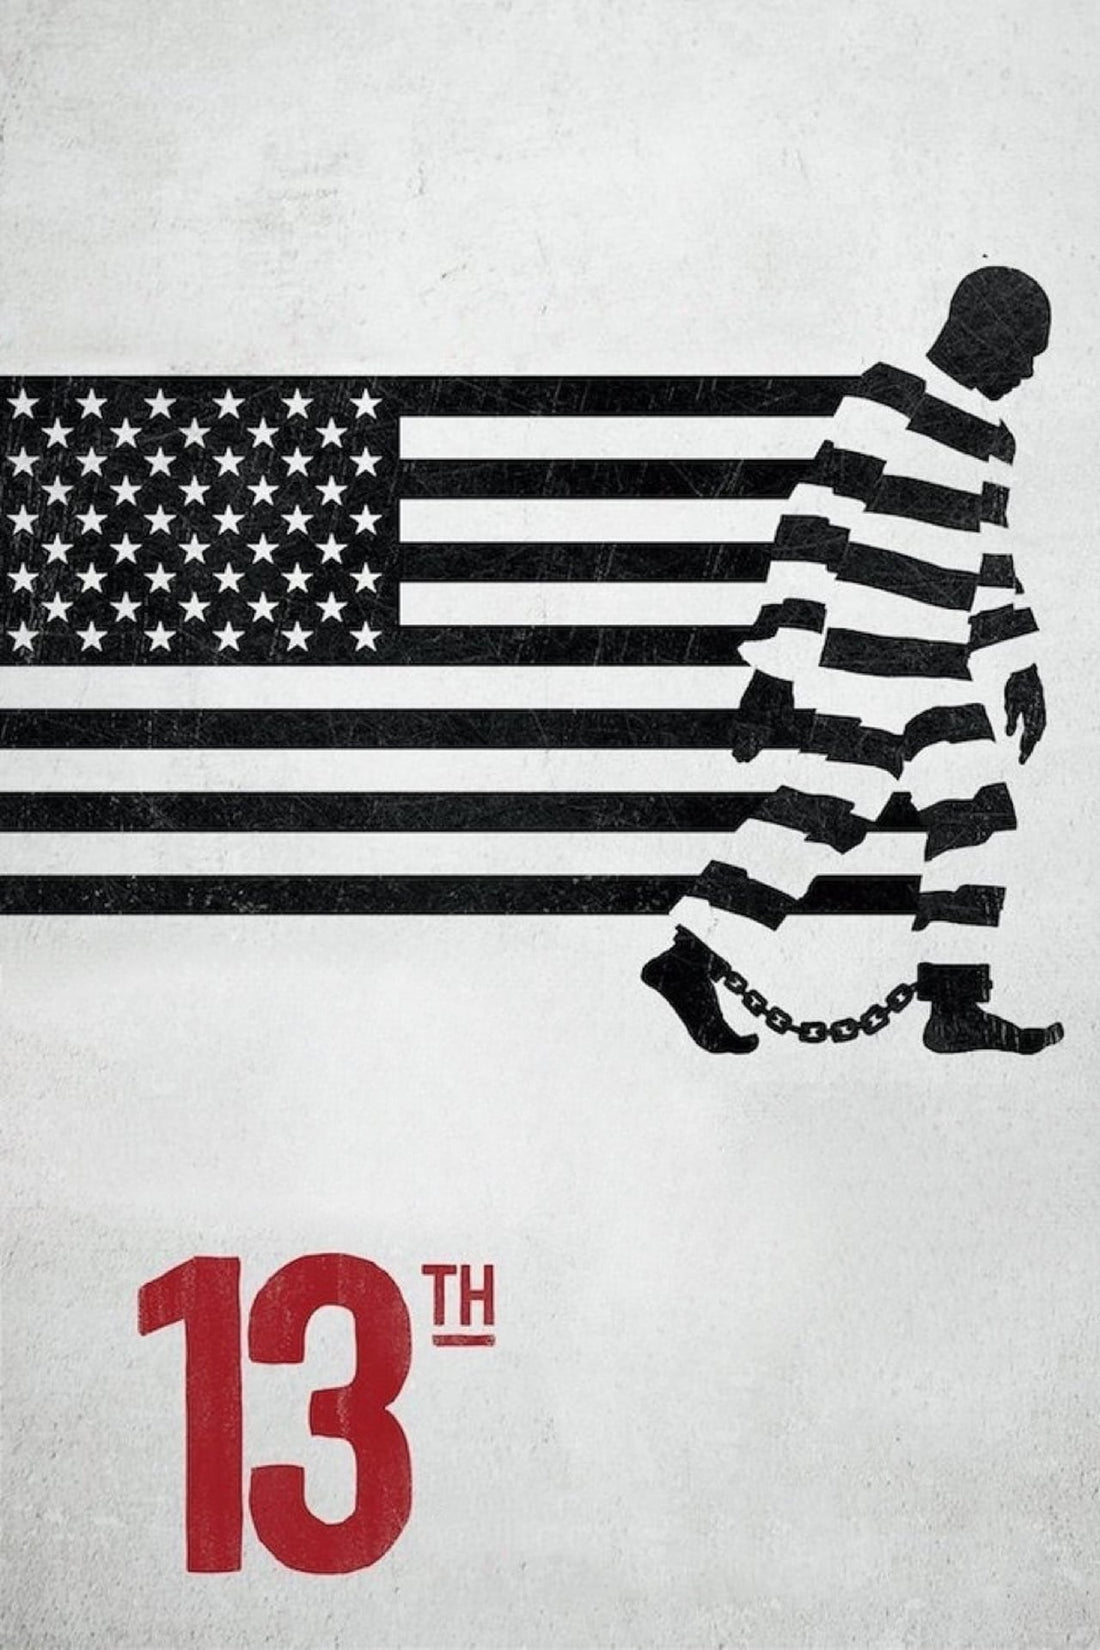 Where to watch 13th